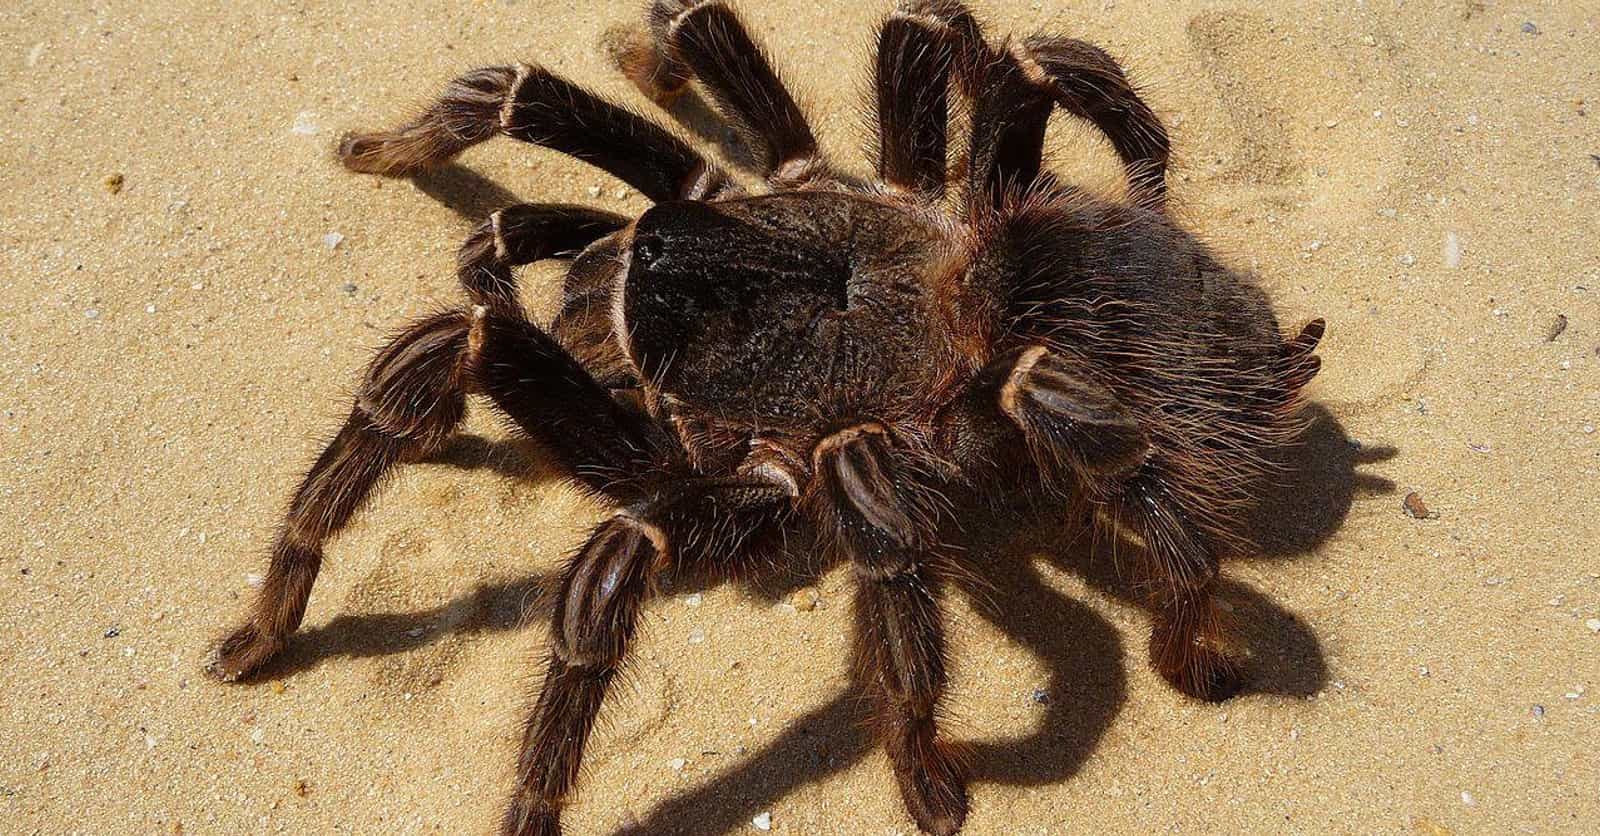 These Are The 12 Biggest Spiders In The World